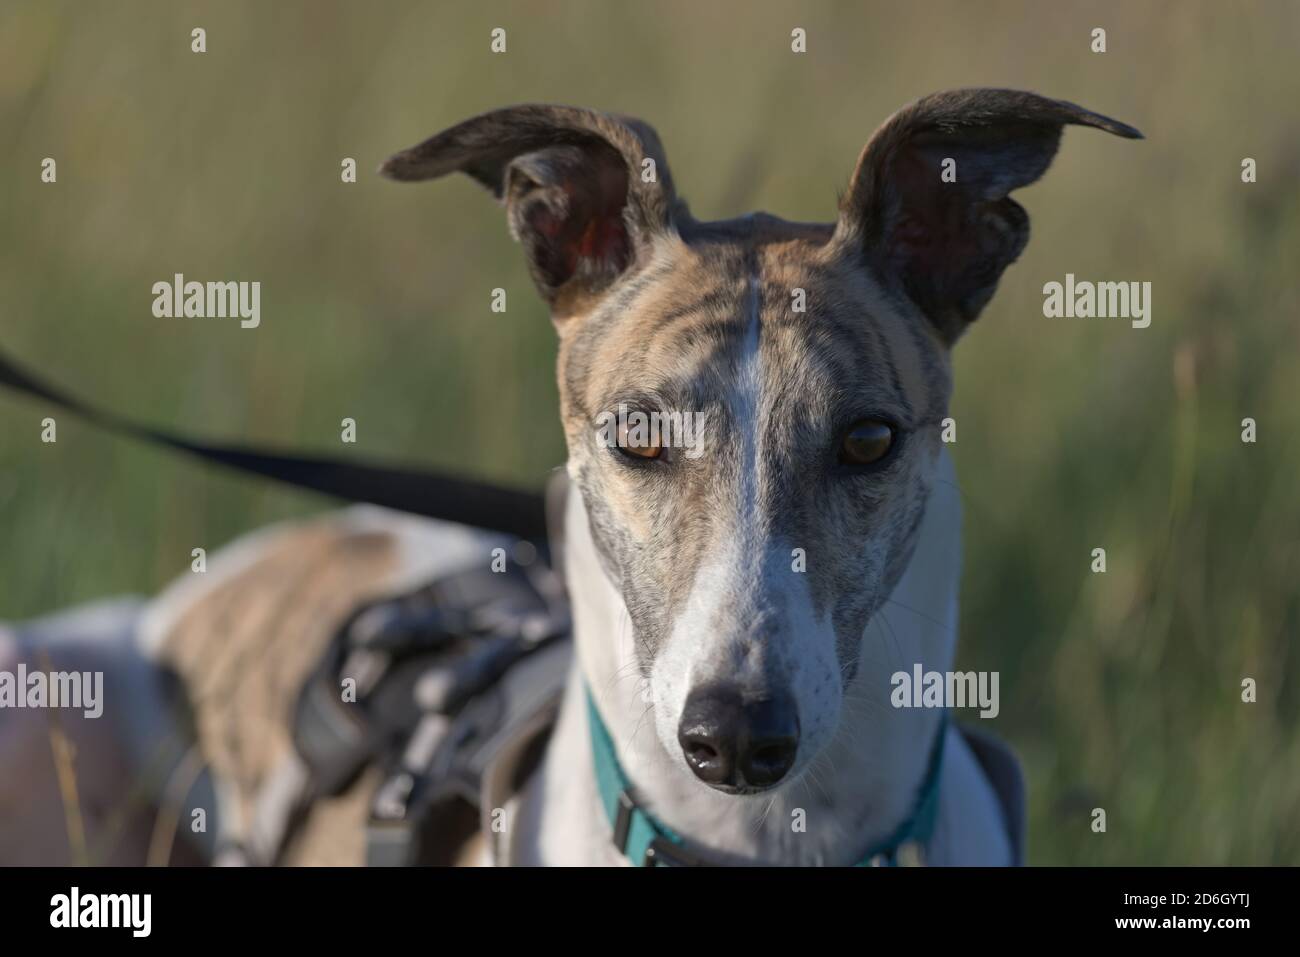 Symmetry and two tone color makes this portrait of a greyhound staring directly at the camera visually striking. Golden hour light makes shadows blue Stock Photo